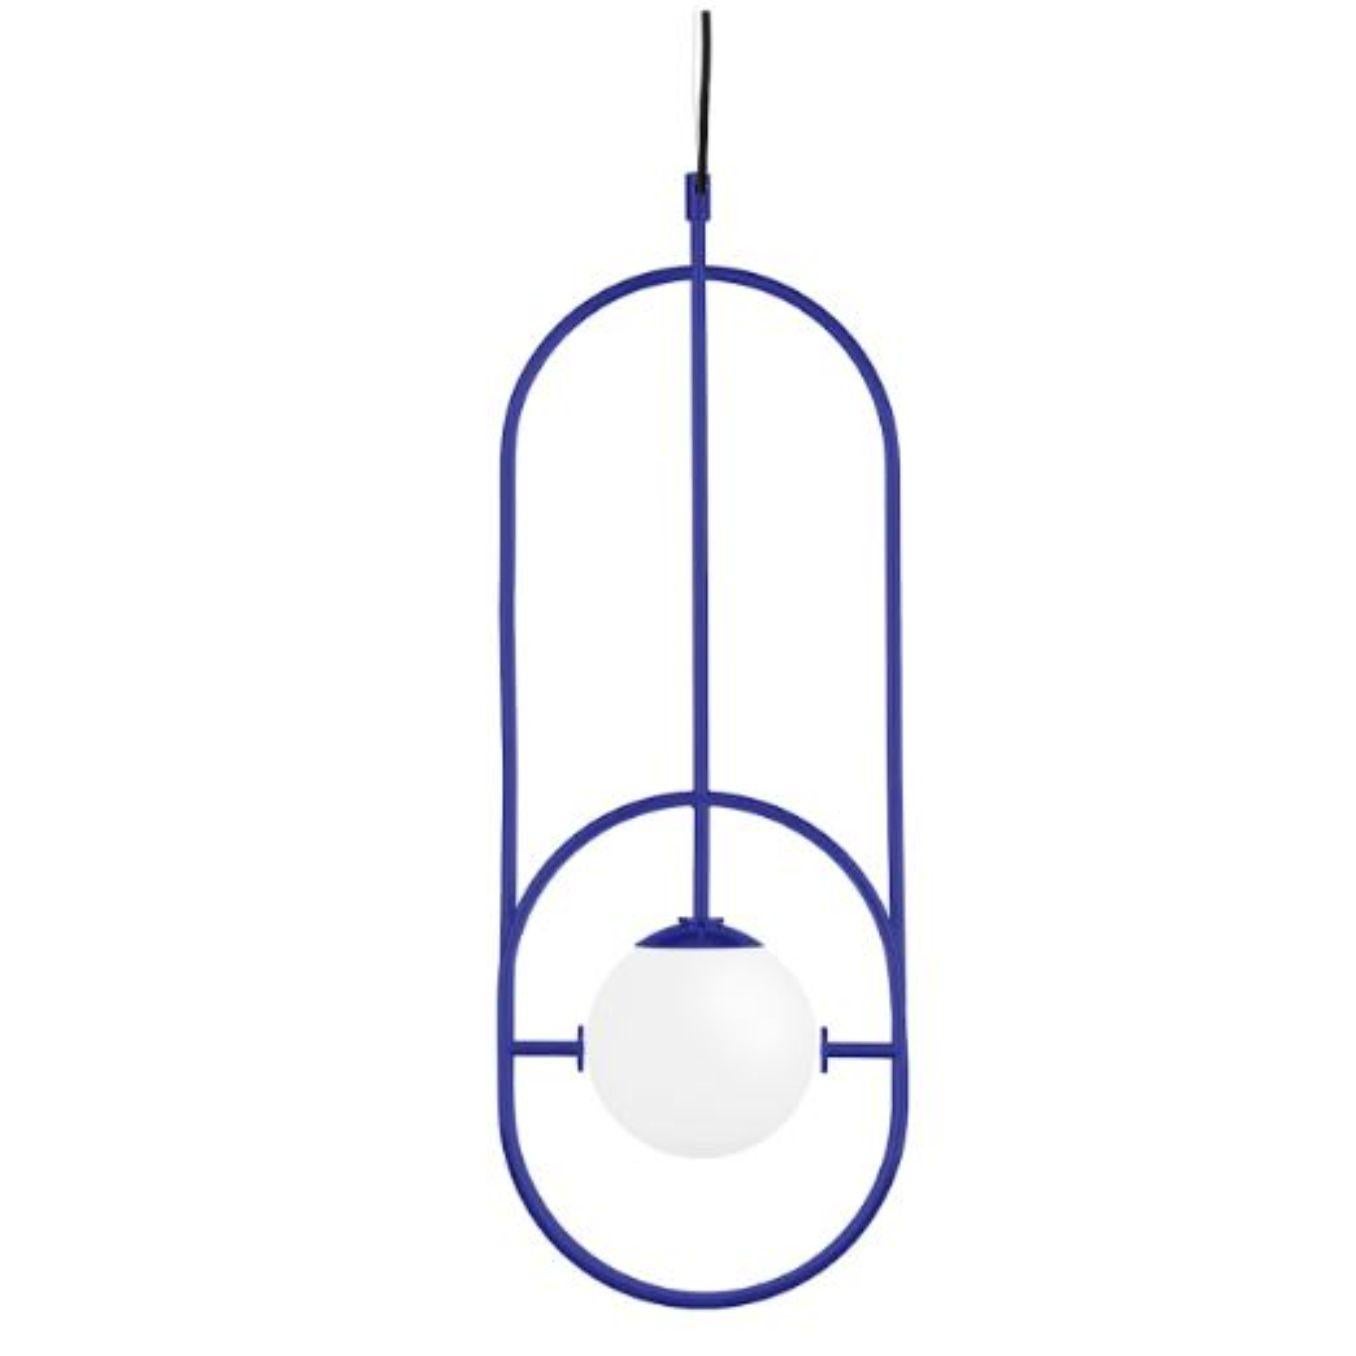 Cobalt Loop I Suspension lamp by Dooq
Dimensions: W 26.5 x D 15 x H 73 cm
Materials: lacquered metal, polished or brushed metal.
Also available in different colors and materials. 

Information:
230V/50Hz
1 x max. G9
4W LED

120V/60Hz
1 x max. G9
4W